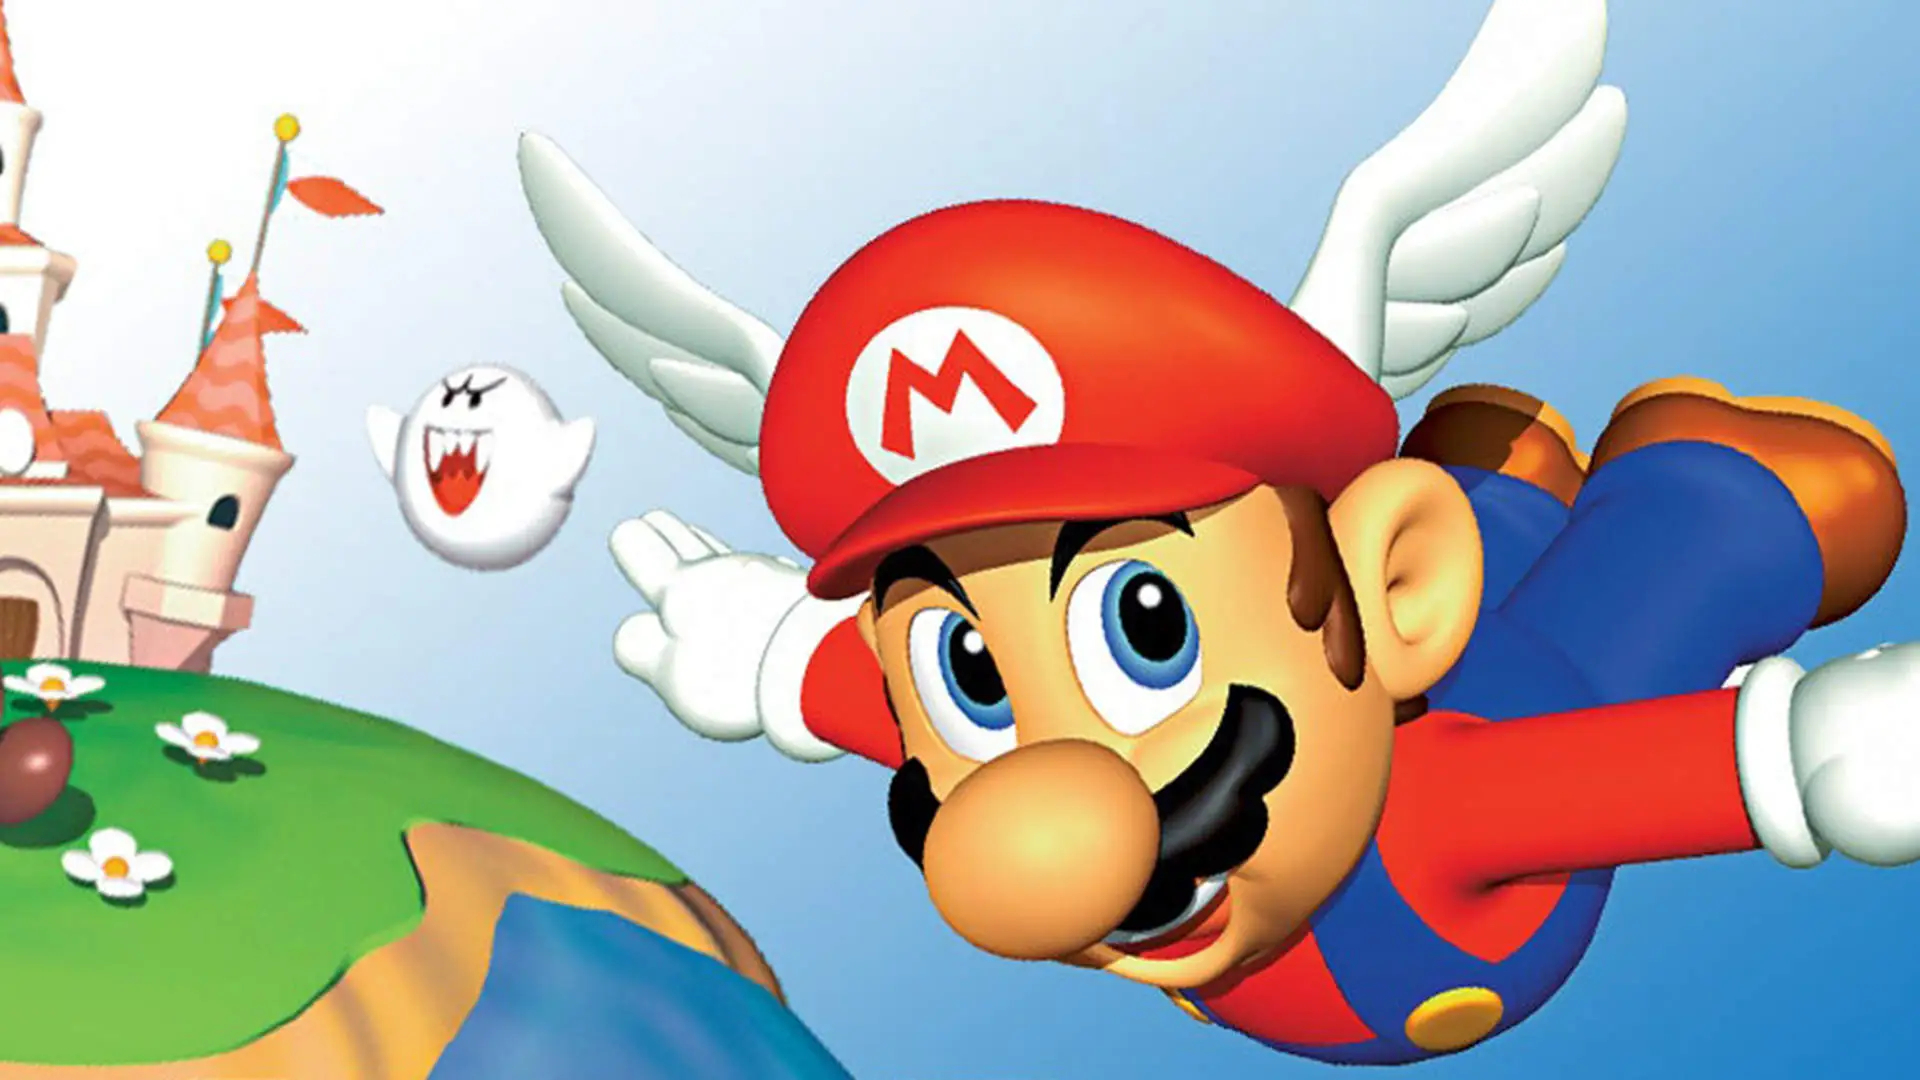 1920x1080 Super Mario 64 Is the Most Expensive Game Ever Sold and Nobody Is Sure Why | Den of Geek